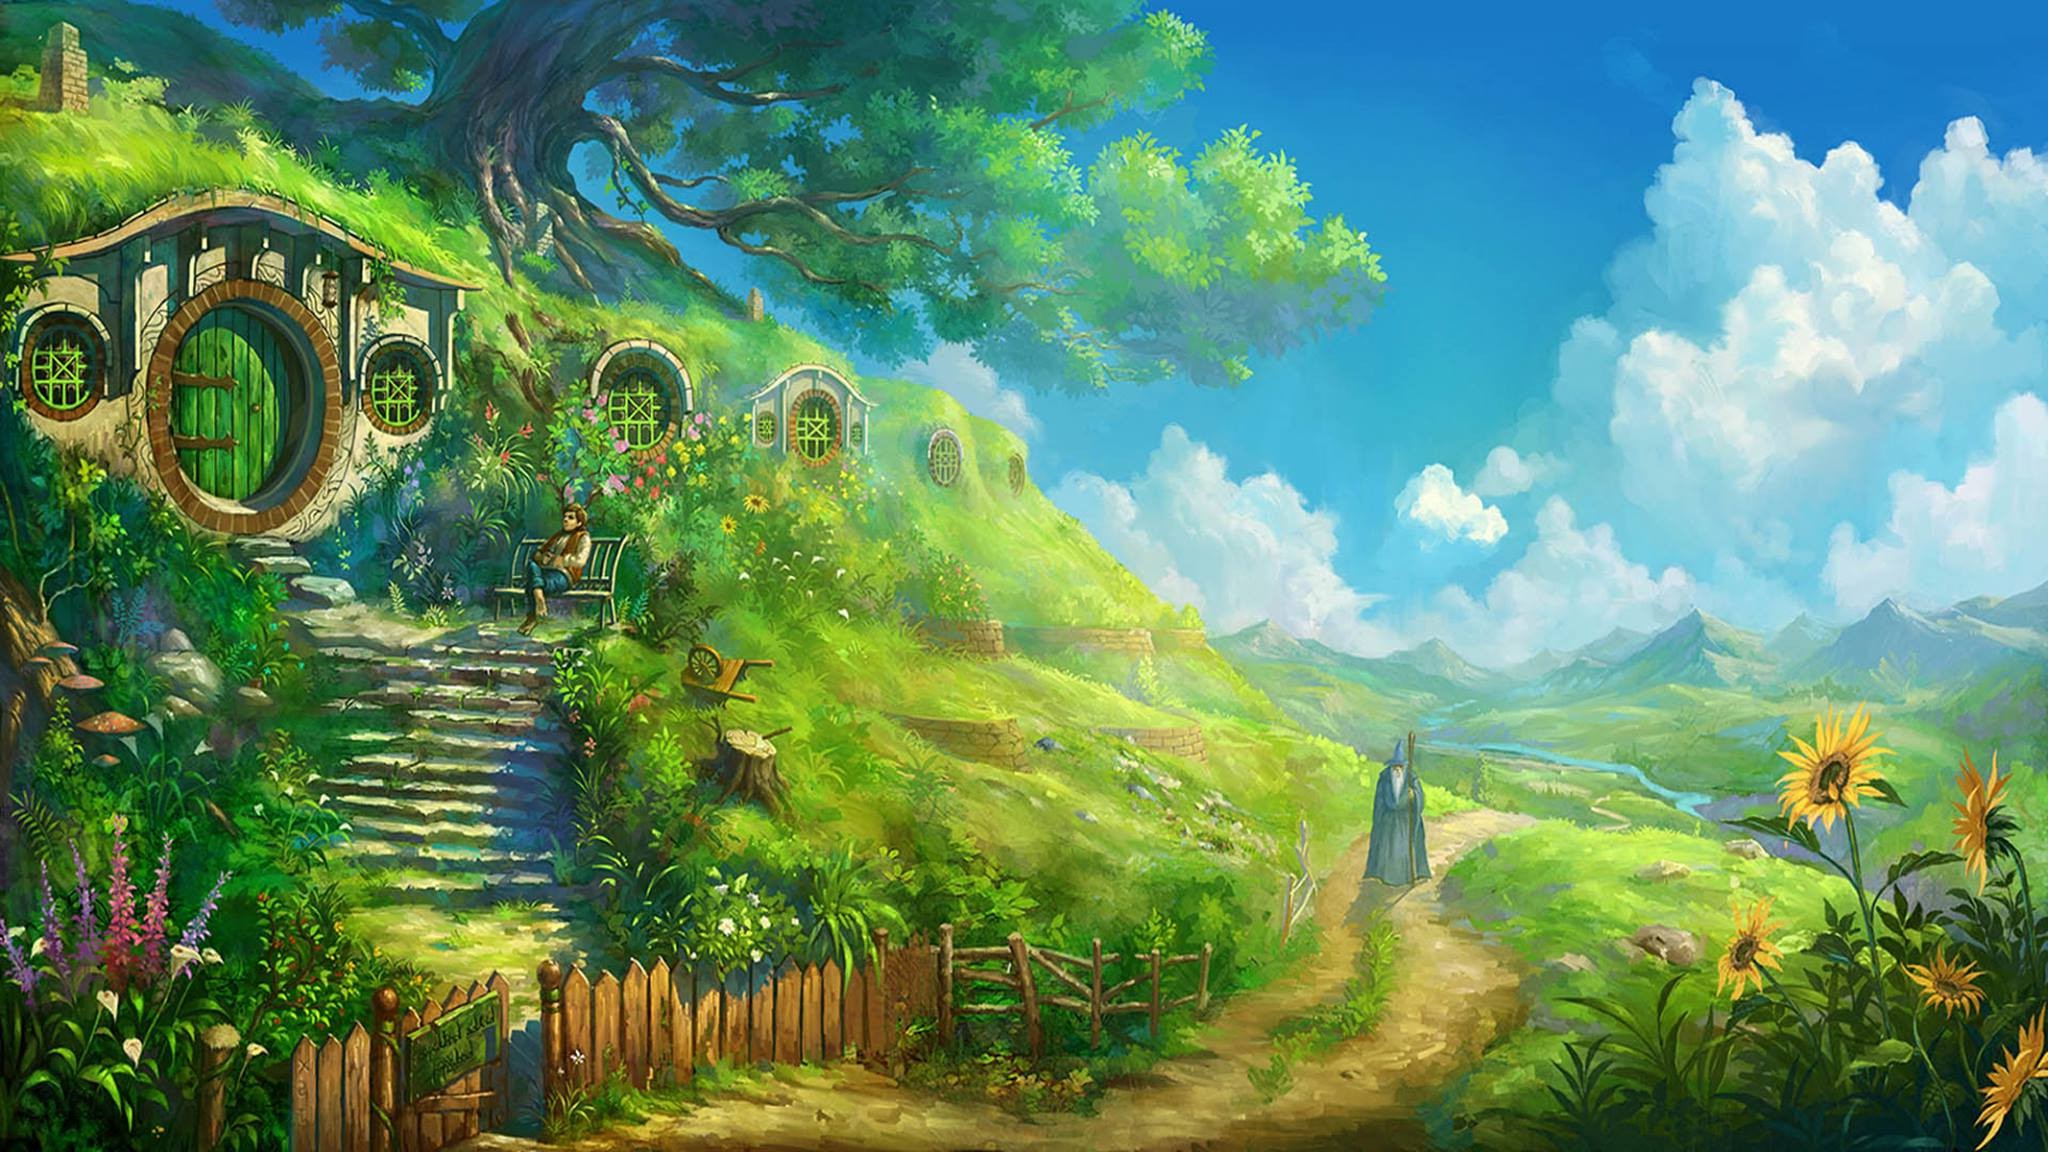 landscape, The Lord Of The Rings, Sky, The Shire, Bilbo Baggins, Bag End Wallpaper